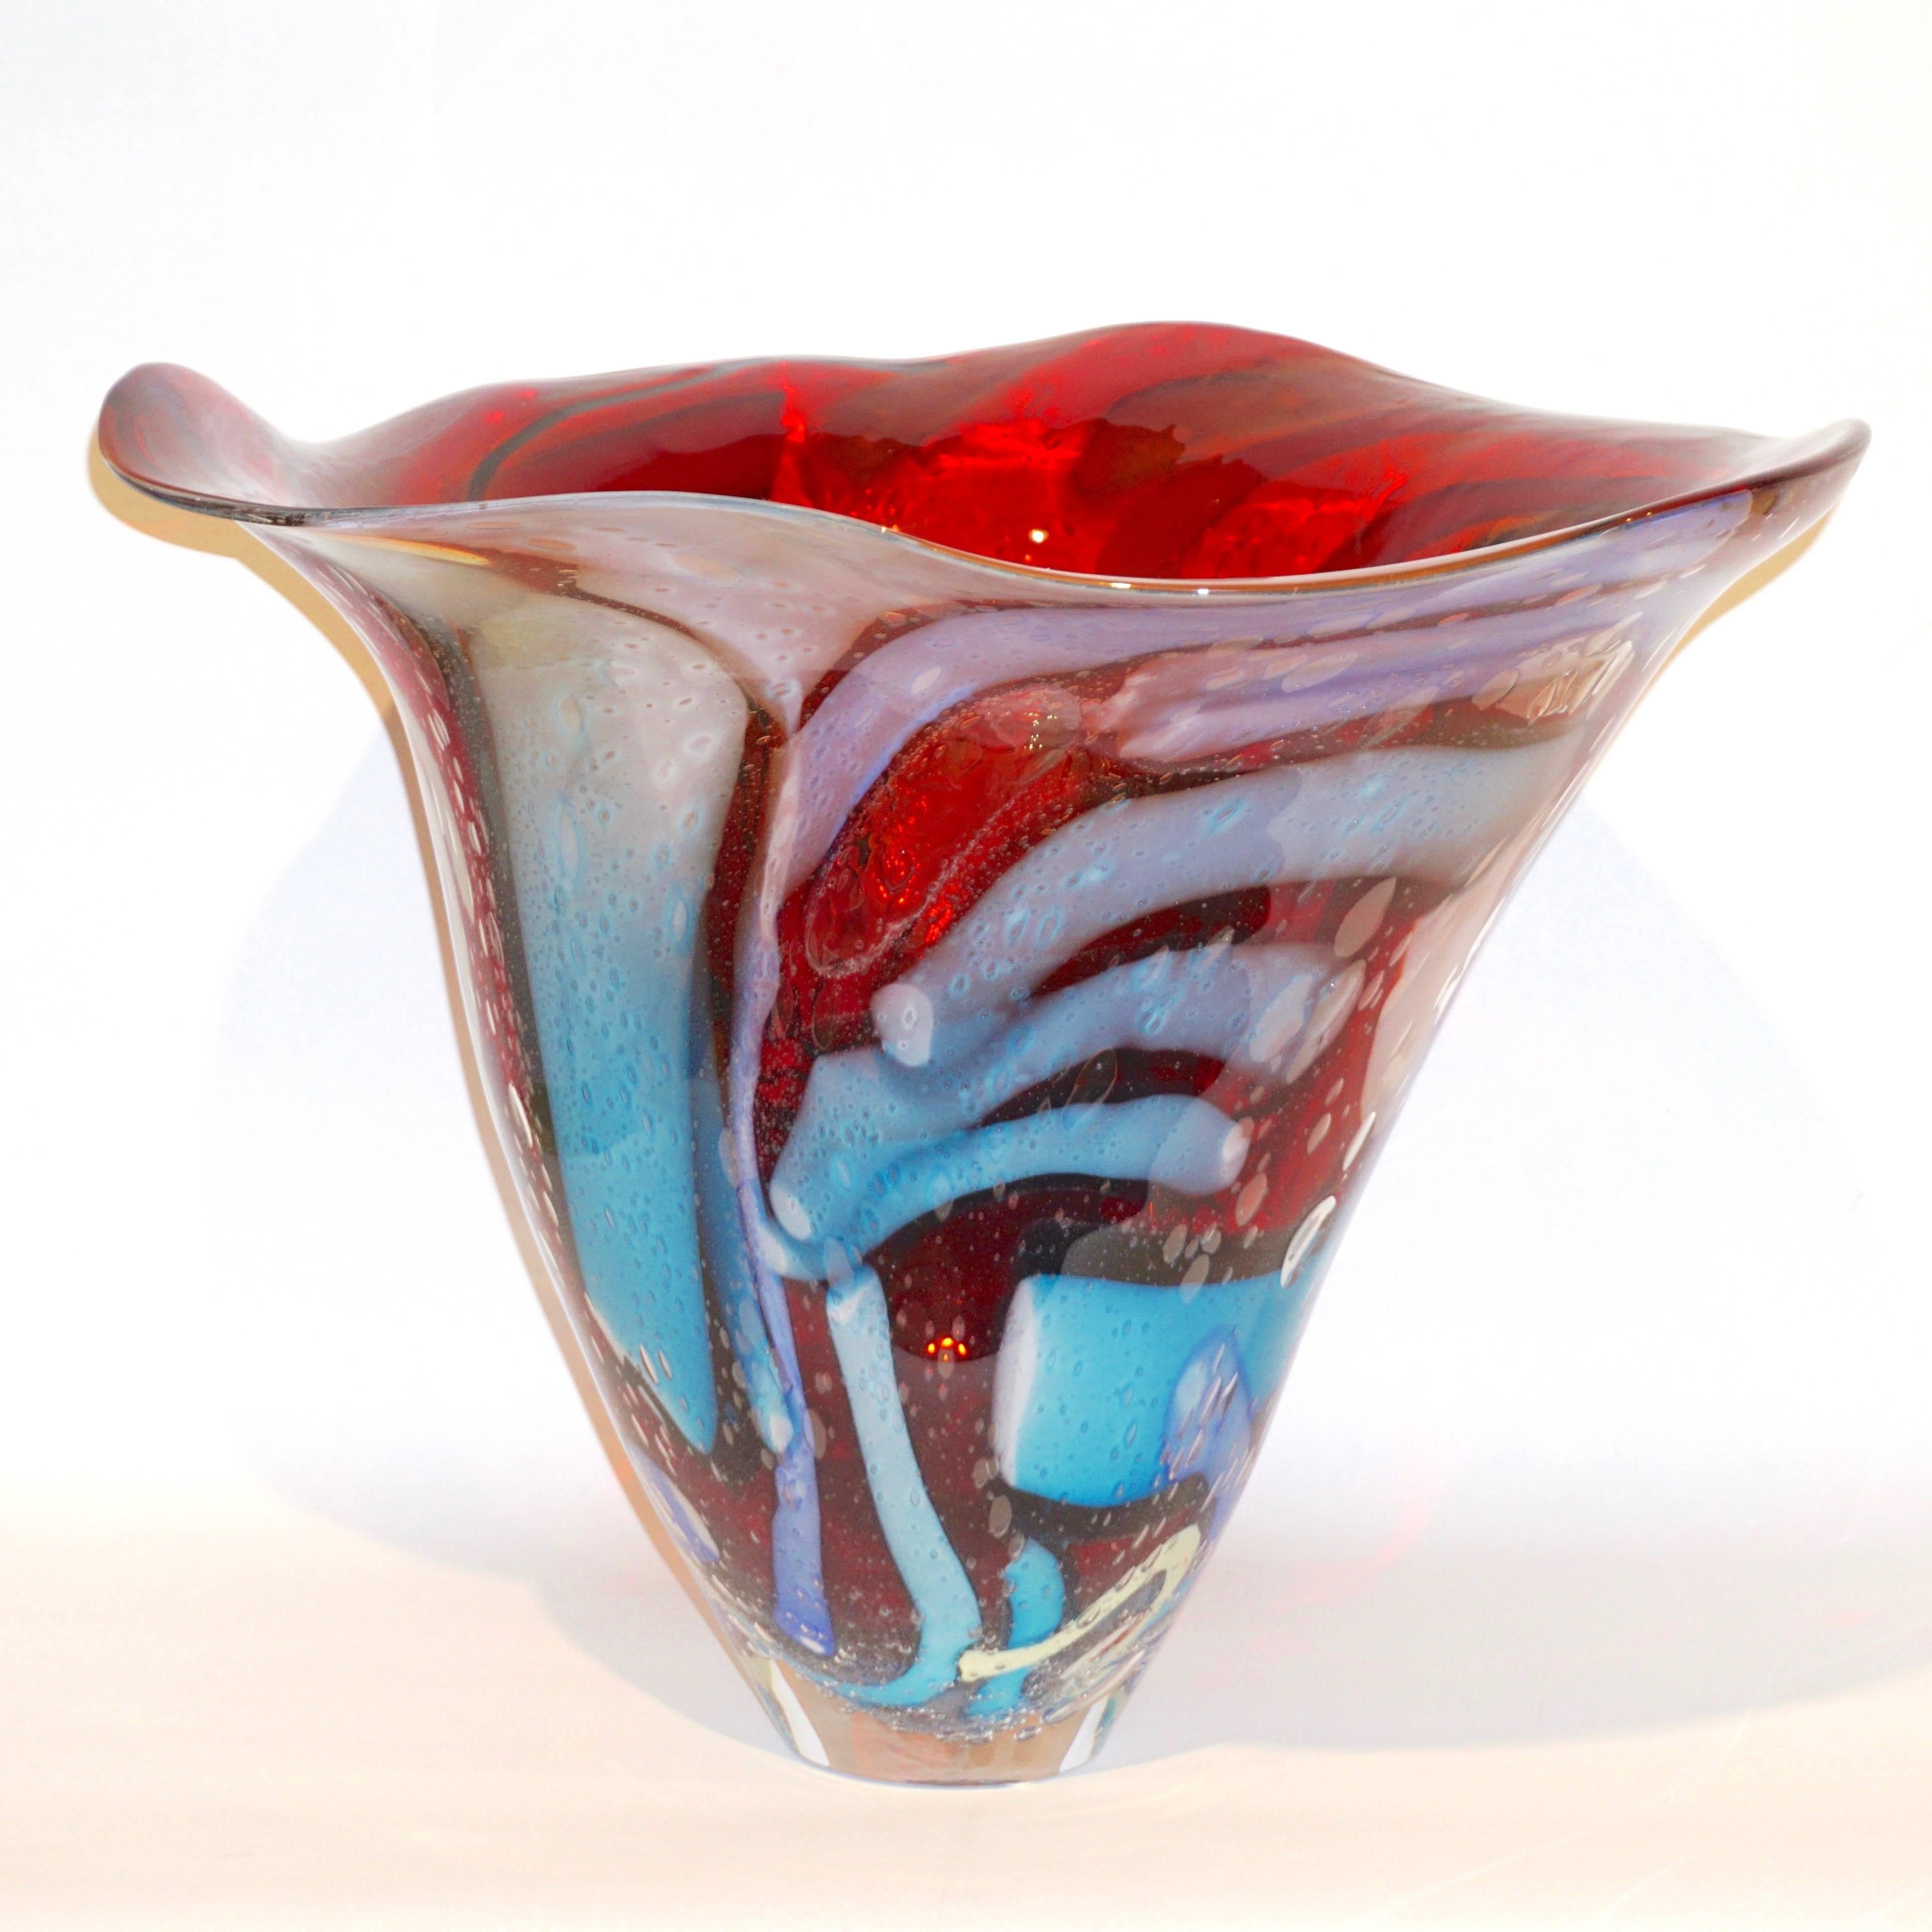 Italian Murano glass vase/monumental bowl, contemporary Work of Art signed by Davide Dona. The mouth blown execution is extraordinary considering the important size and weight. The difficult to achieve decoration is realized with a transparent red